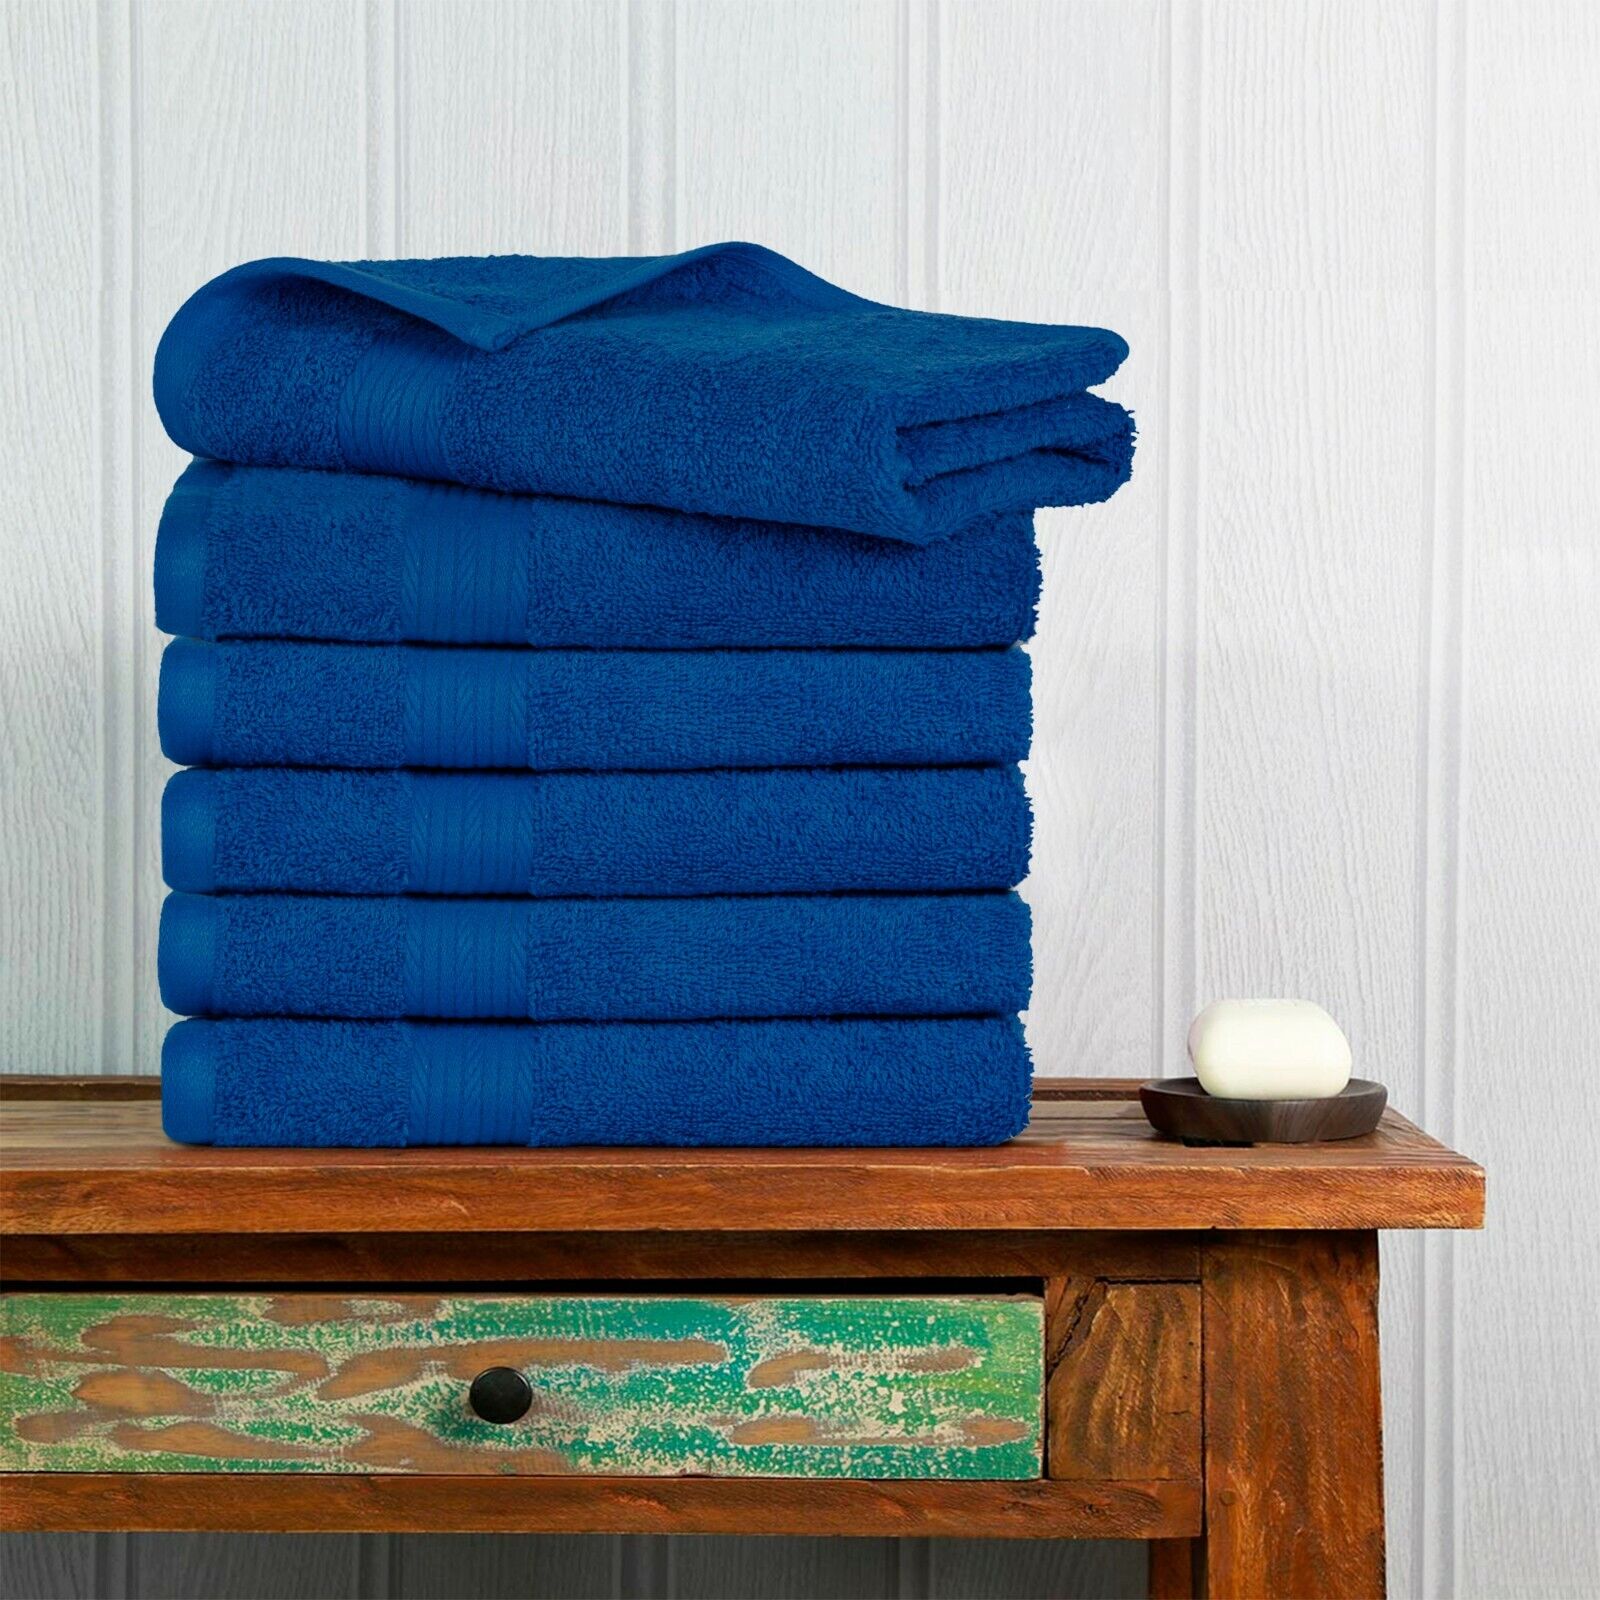 Ample Decor Hand Towel Pack of 6 High Absorbency 100% Cotton 600 GSM Soft 